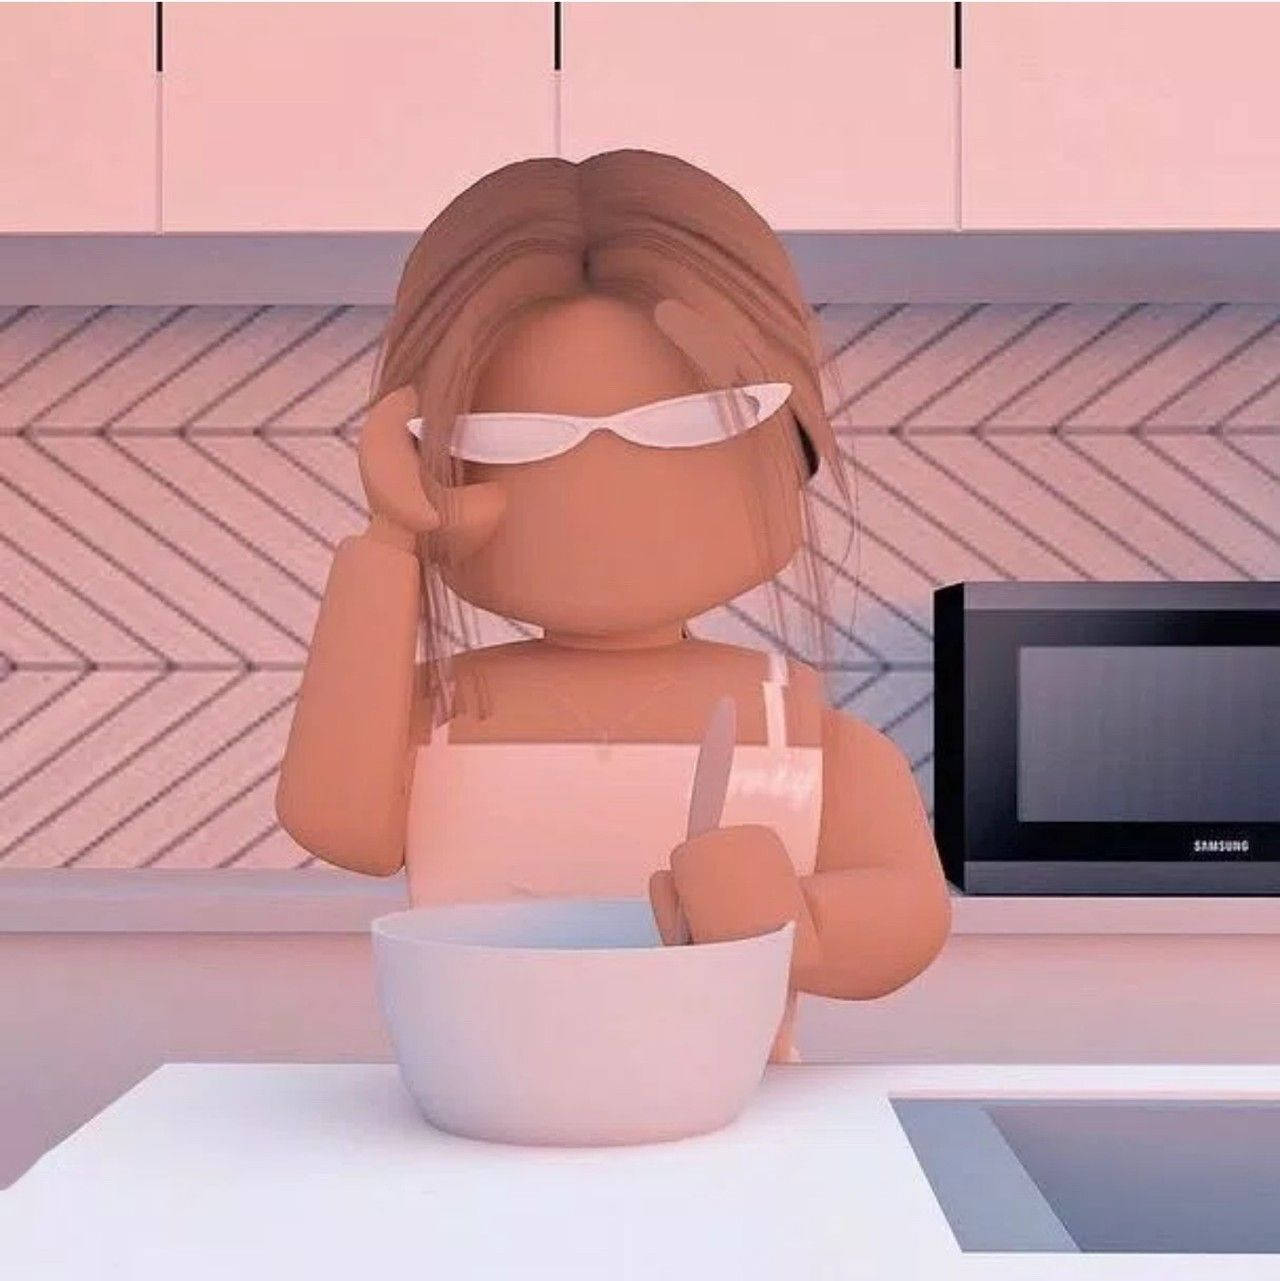 Cute Roblox Cooking With Sunglasses Wallpaper